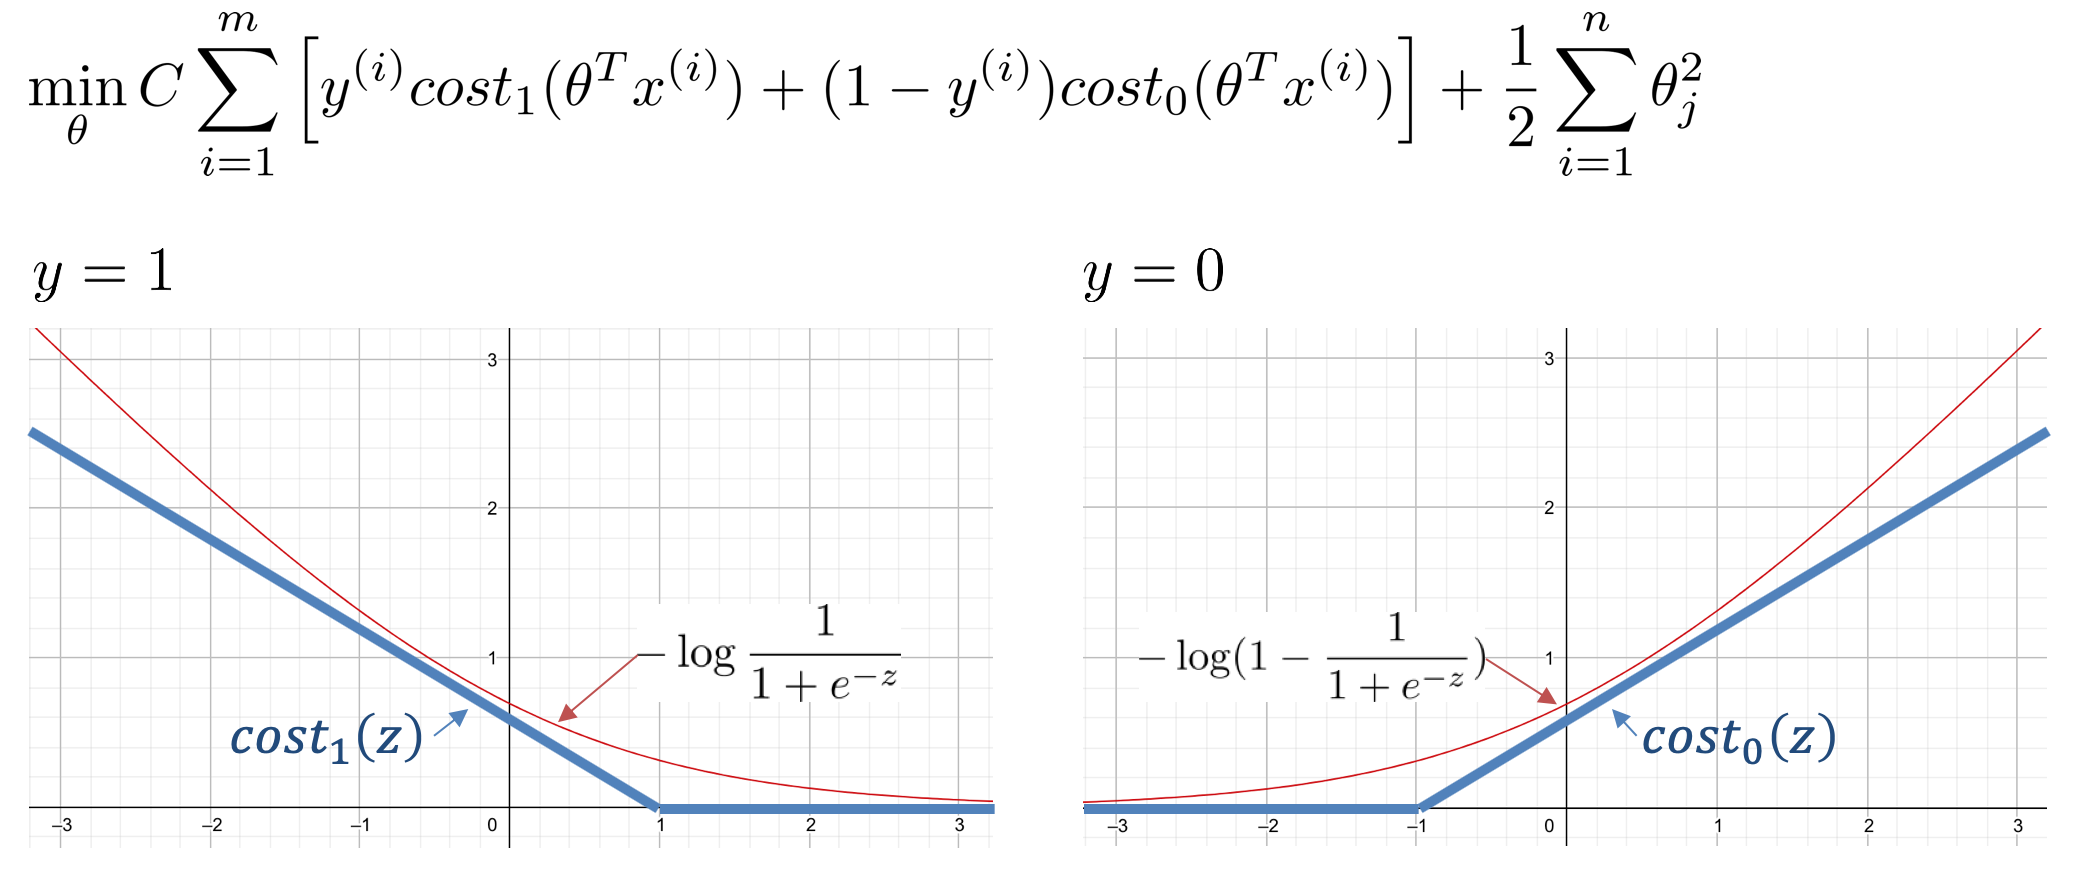 SVM_Cost function